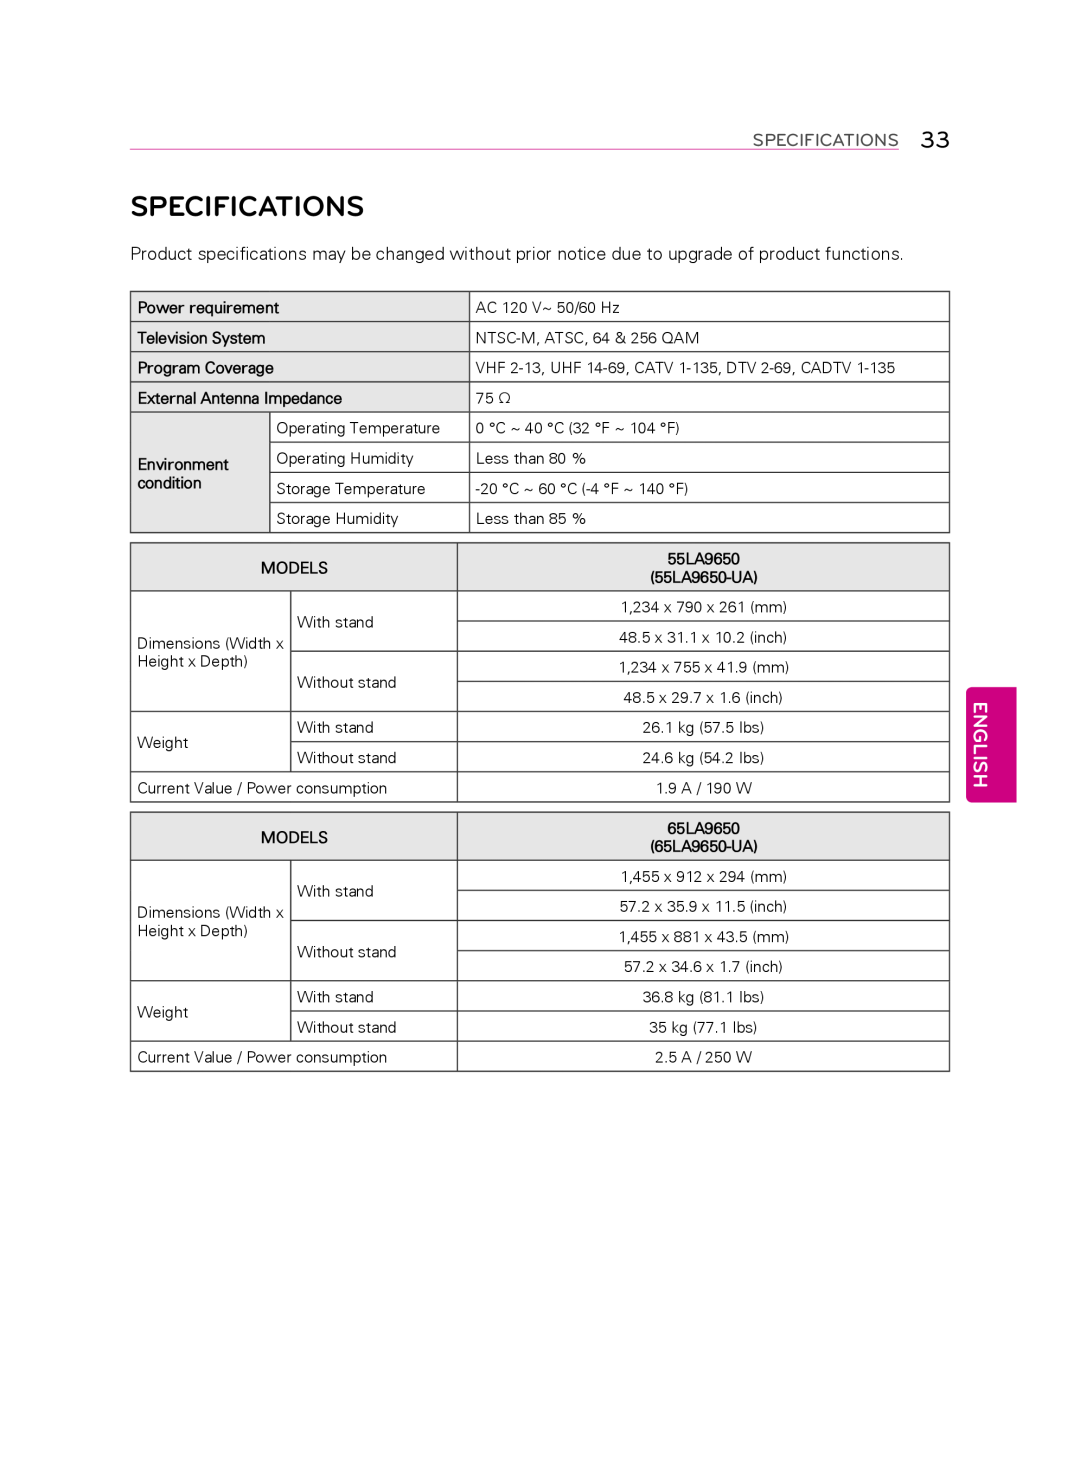 LG Electronics 55LA9650 owner manual Specifications, English 